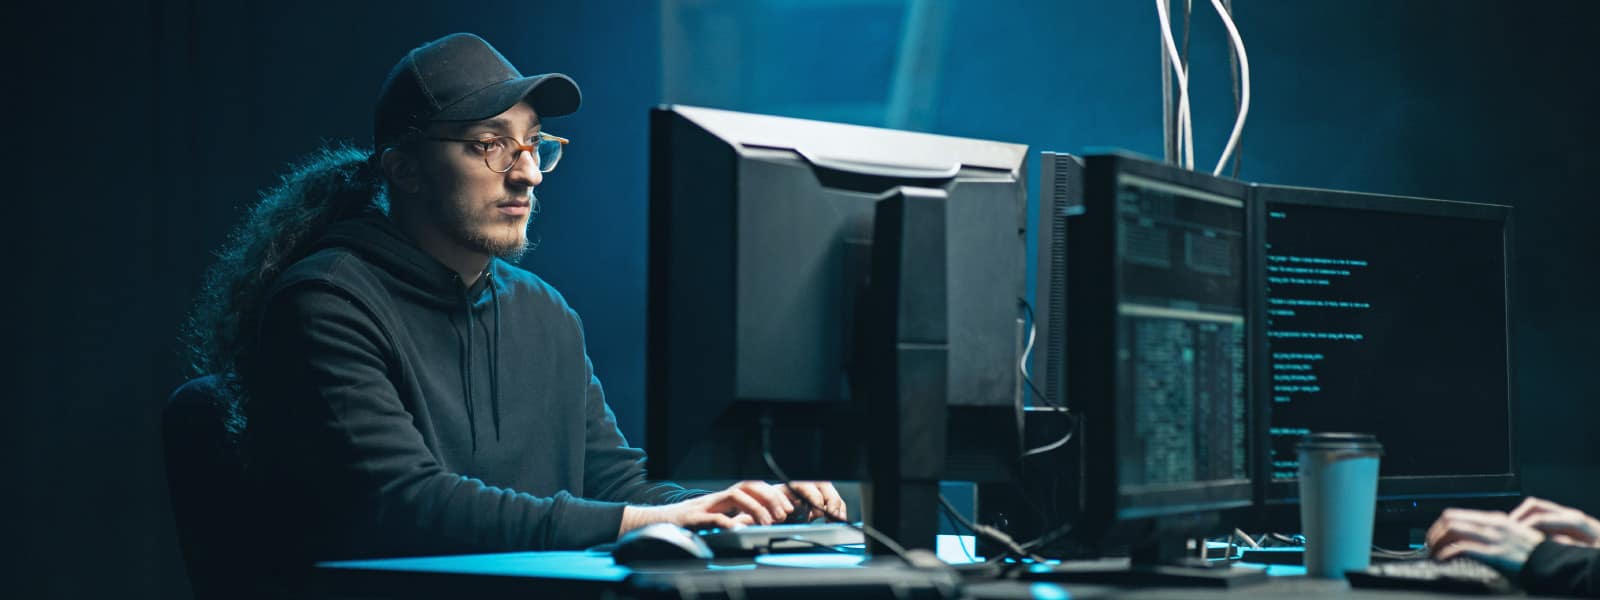 A man with glasses, a black ball cap, and a black sweatshirt sits in a dark room coding at a desktop computer